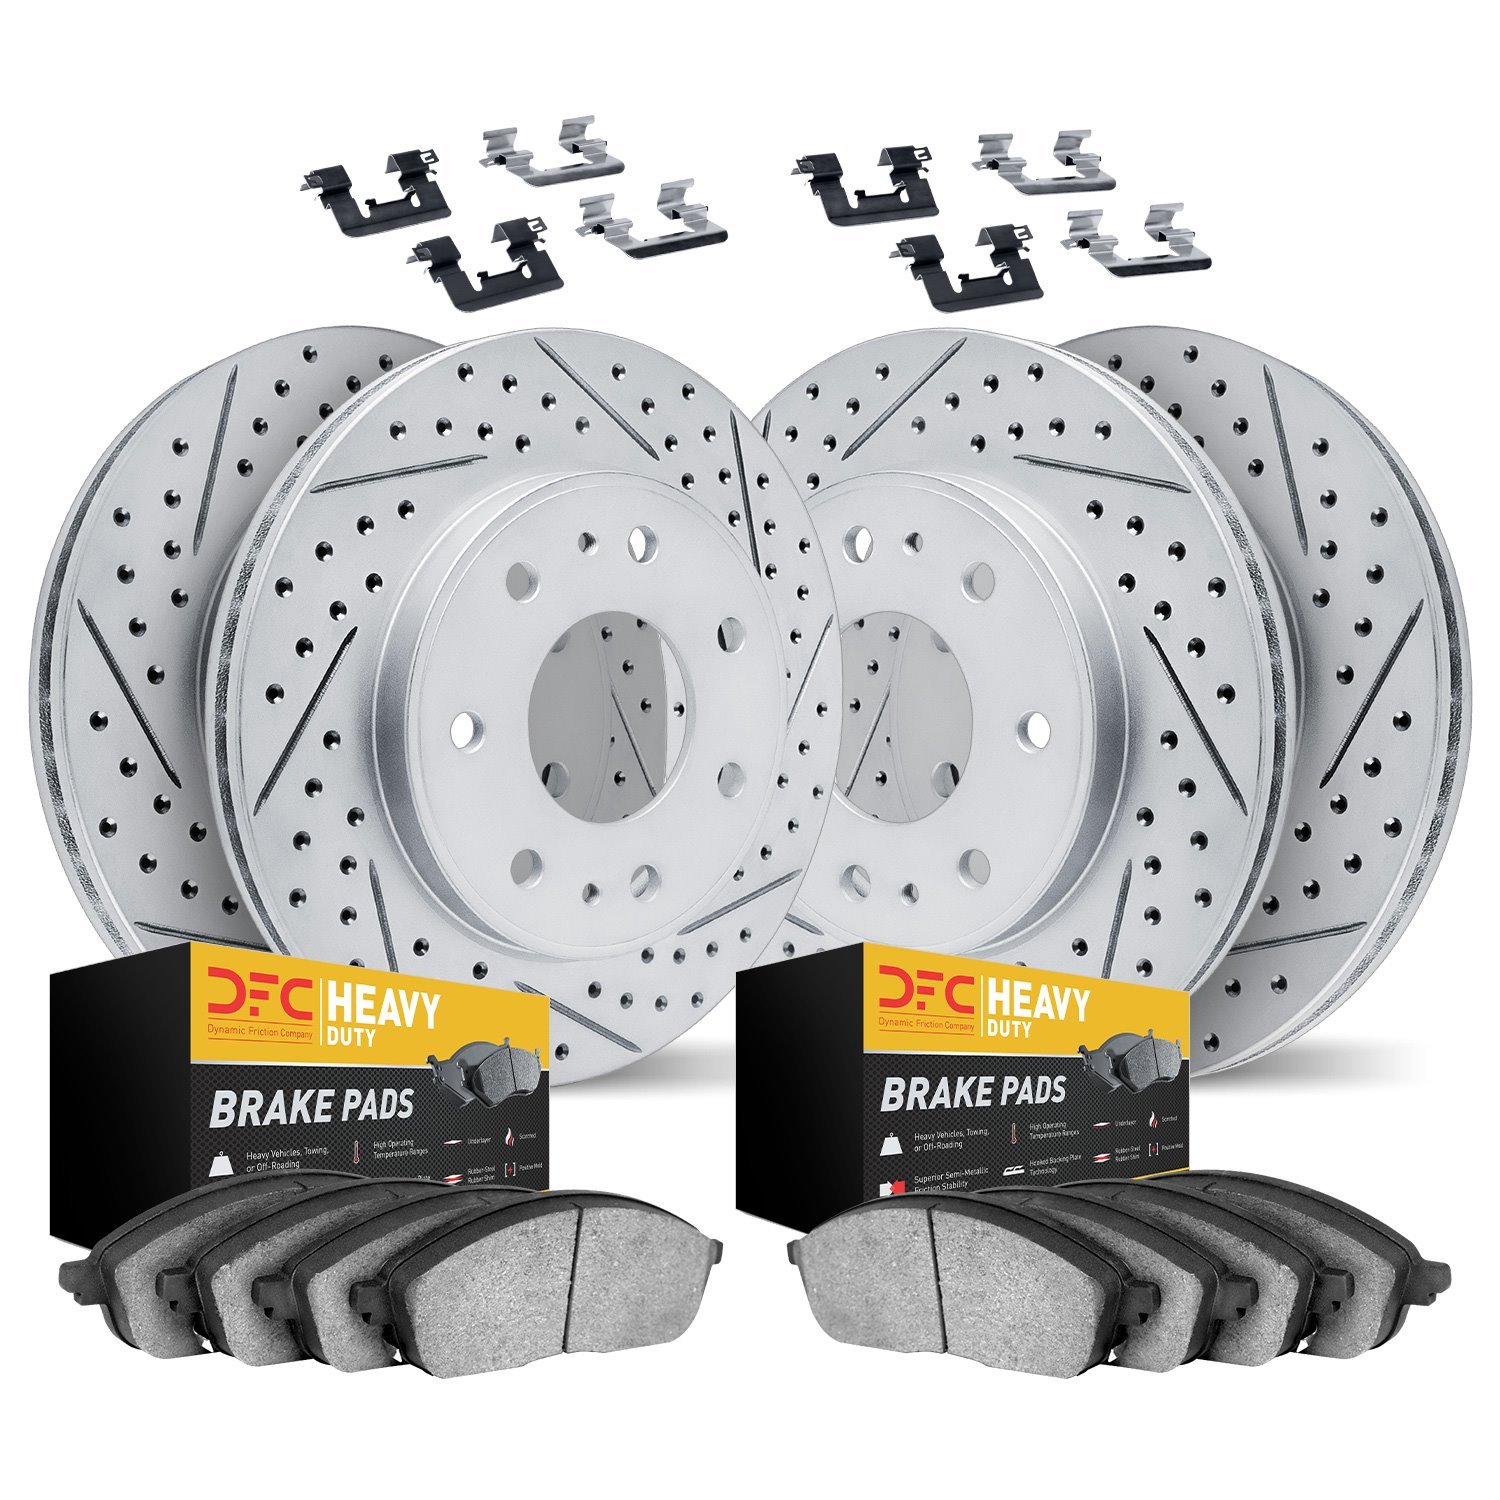 2214-54004 Geoperformance Drilled/Slotted Rotors w/Heavy-Duty Pads Kit & Hardware, 2012-2014 Ford/Lincoln/Mercury/Mazda, Positio